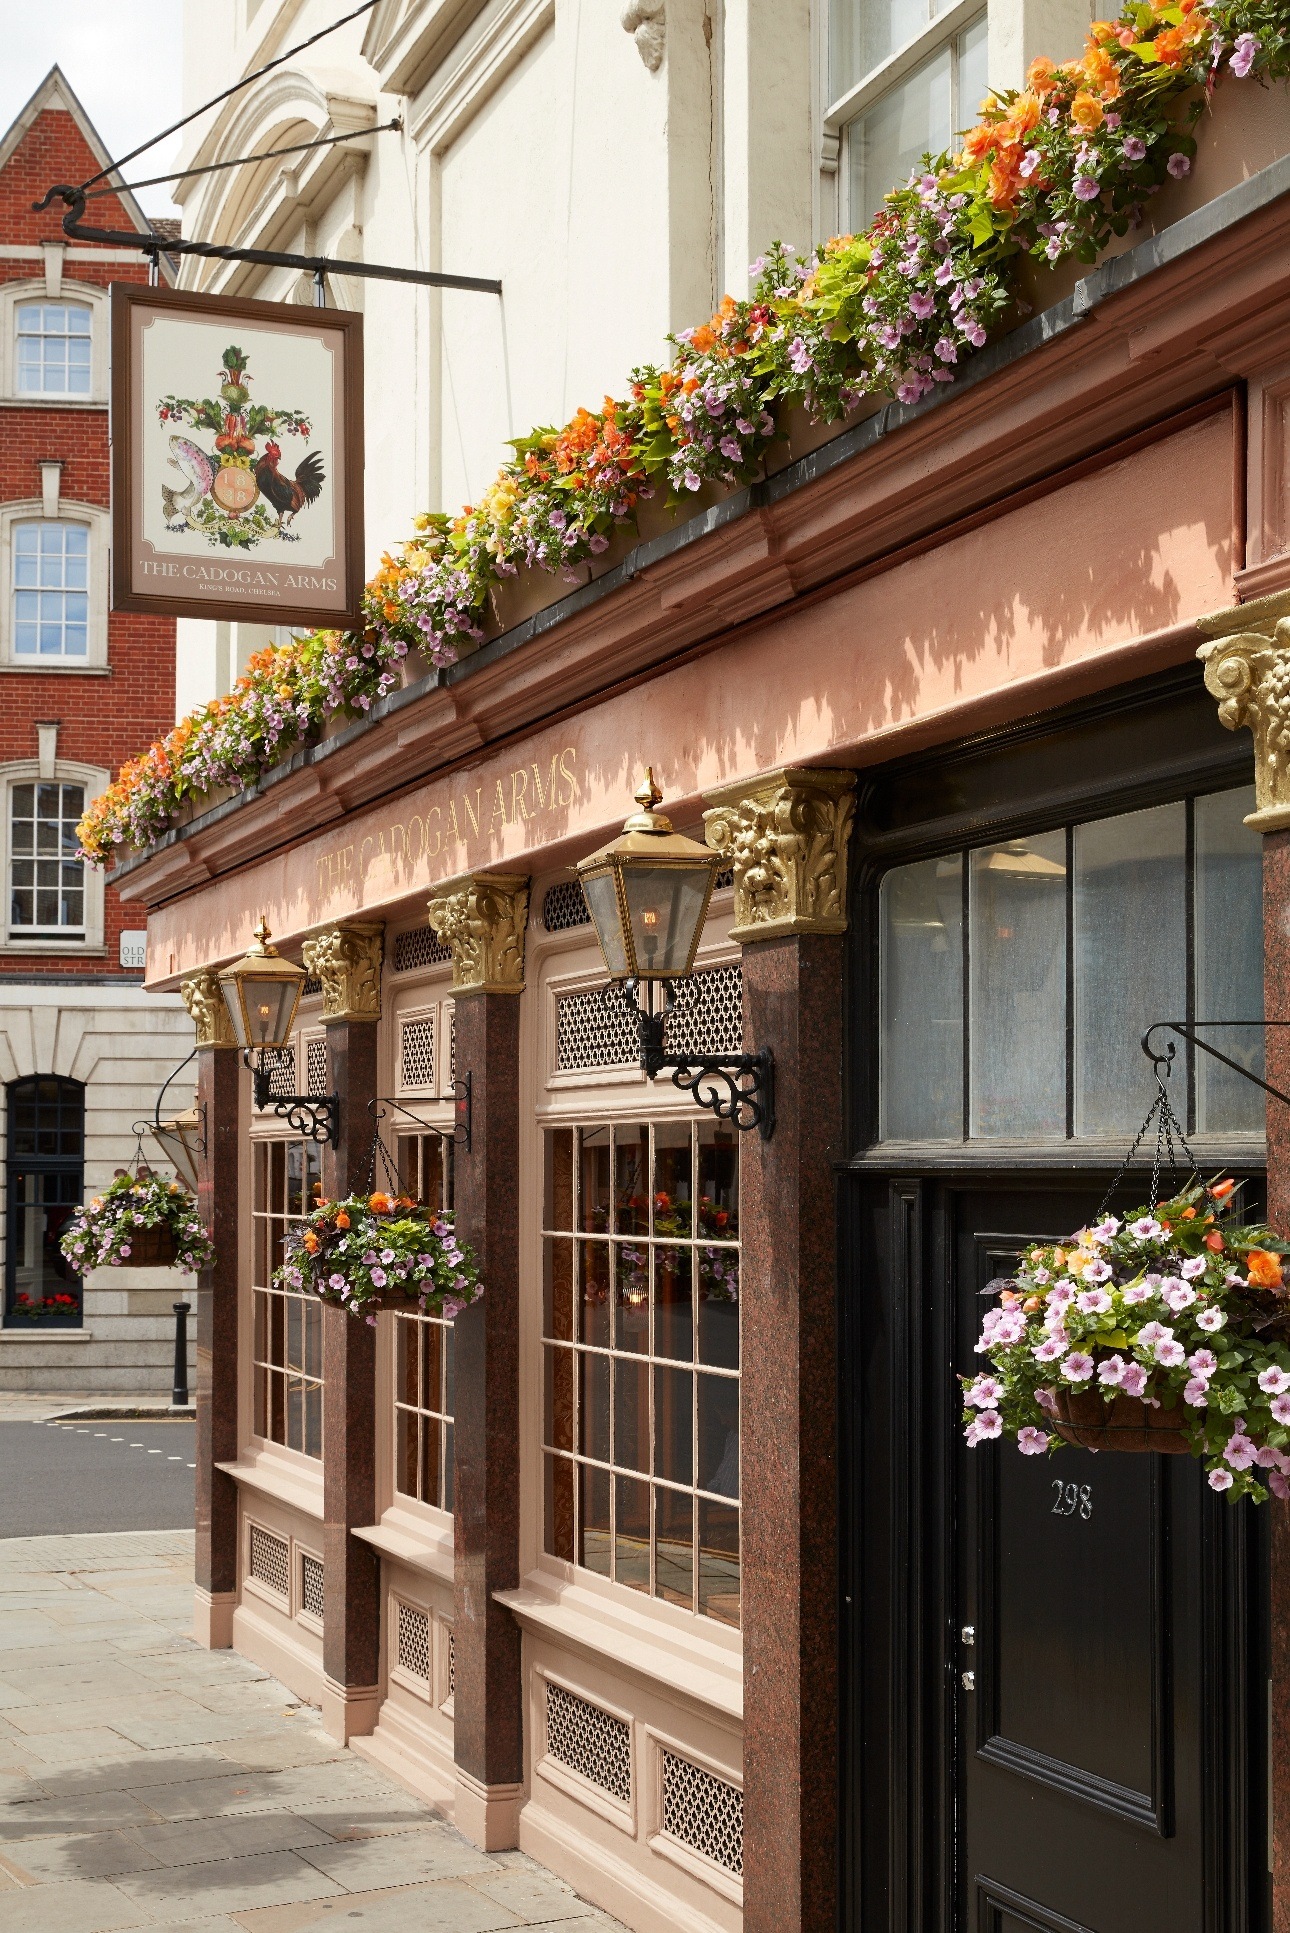 outside of The Cadogan Arms london pub on the street with flowers covering it